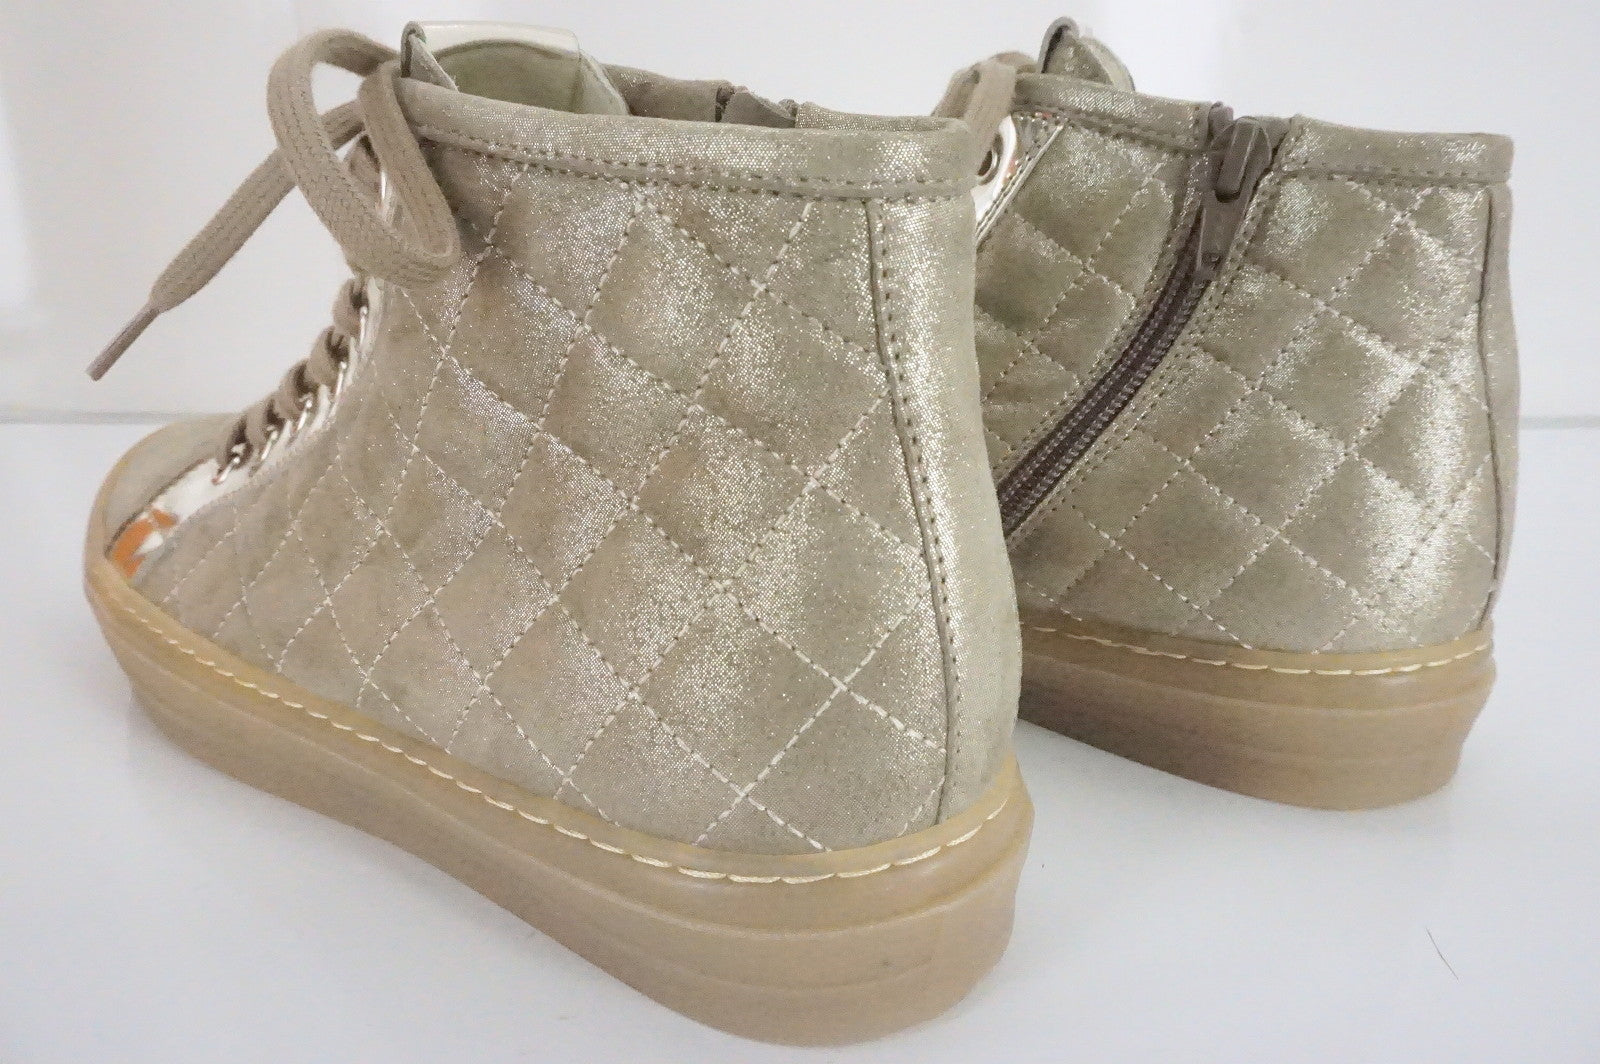 Attilio Giusti Leombruni Quilted Suede Ginger High Top Sneaker Size 38.5 NIB AGL